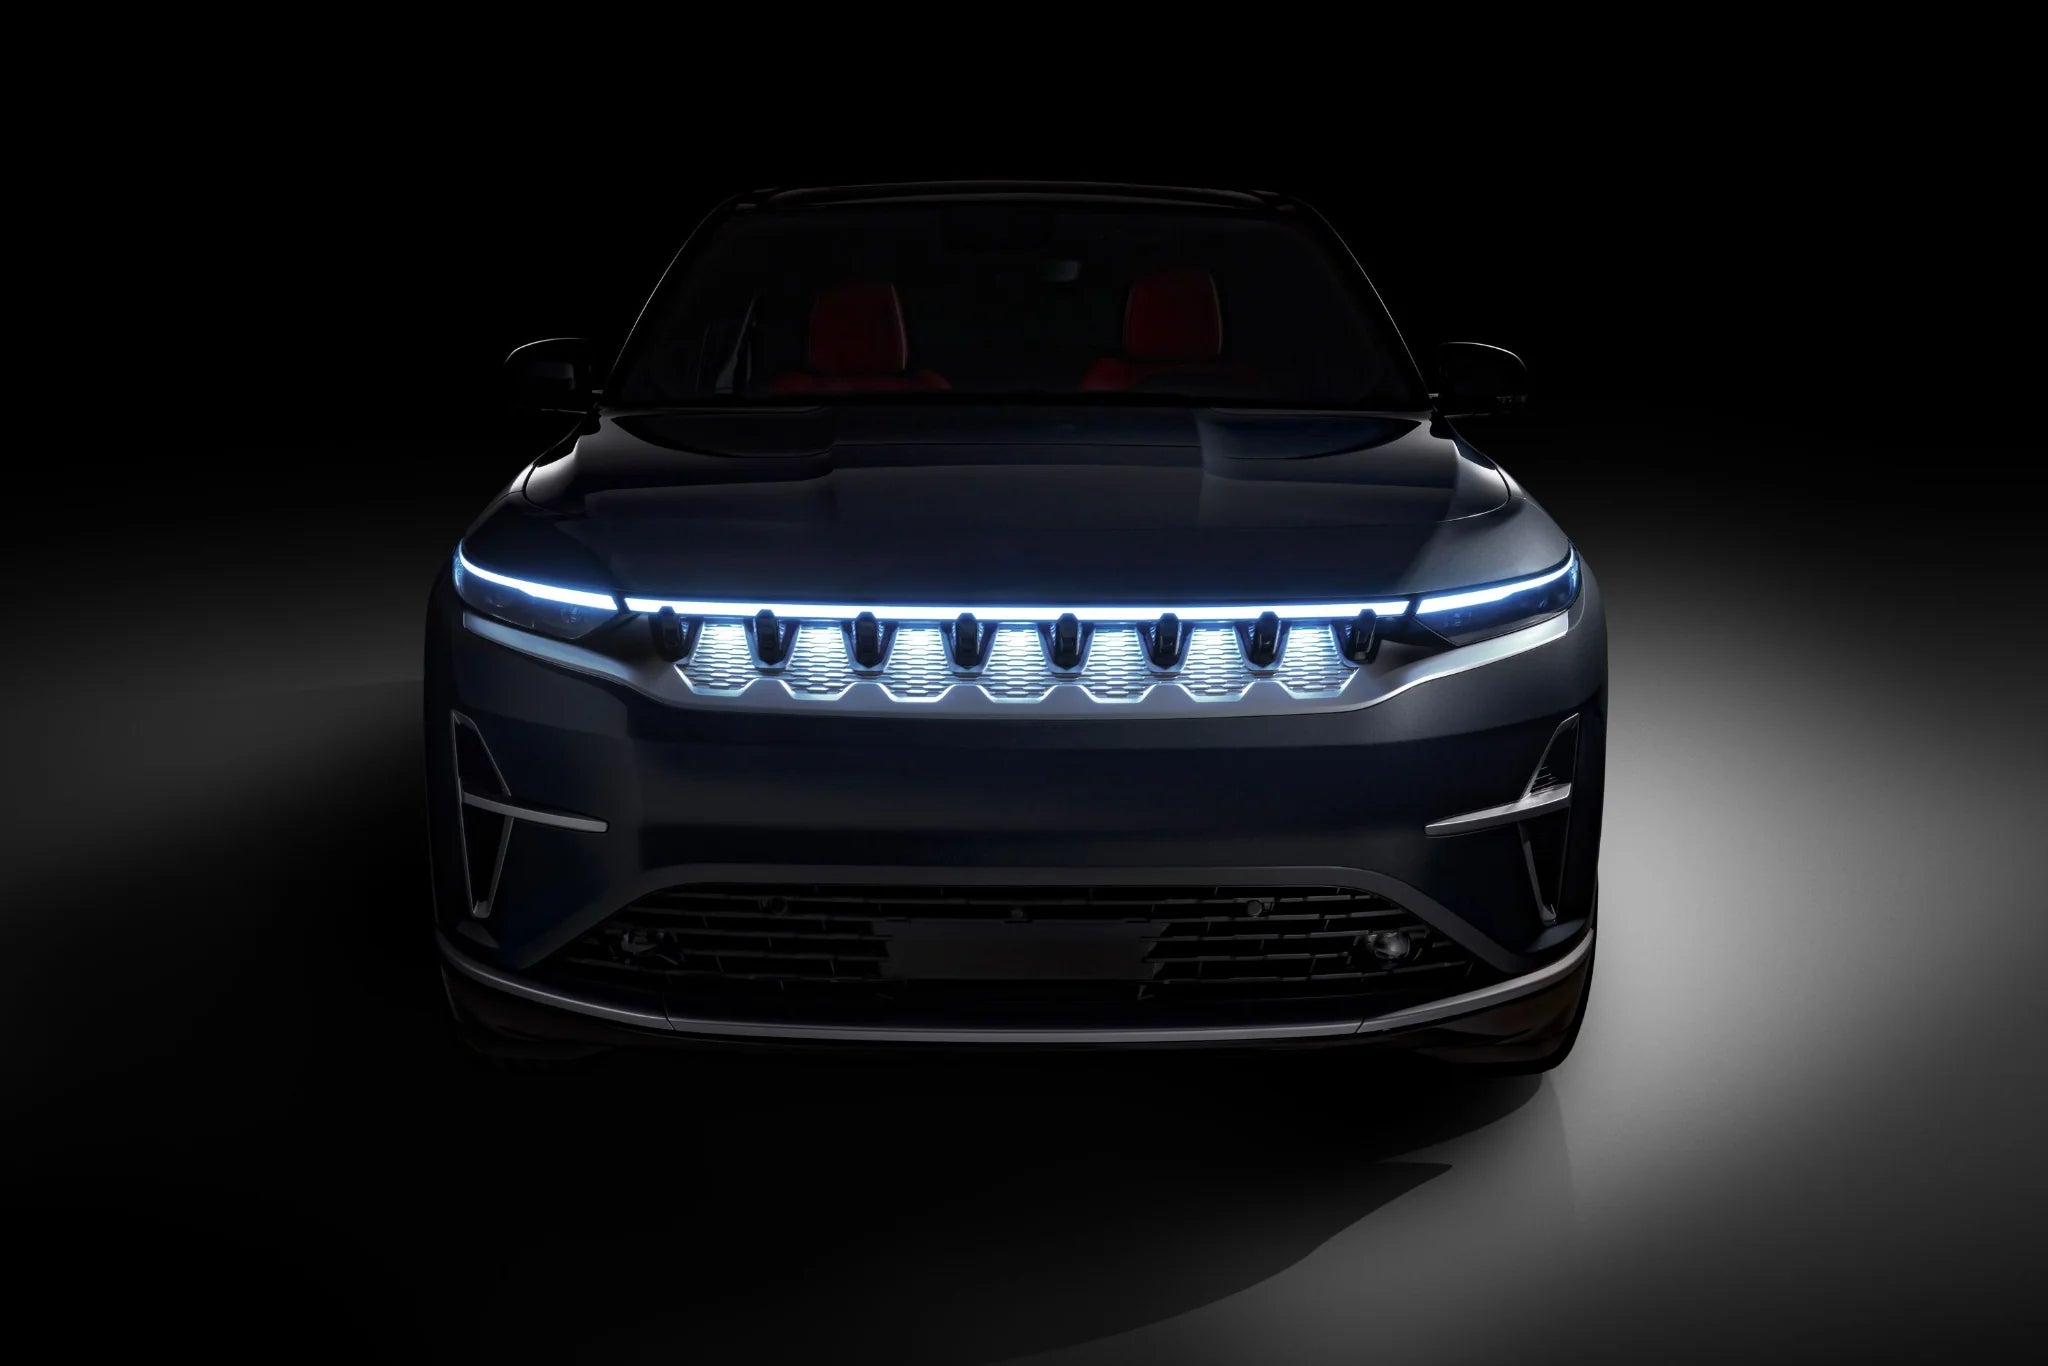 600-HP Electric Jeep Wagoneer S Teased, Set for Fall On-Sale Date